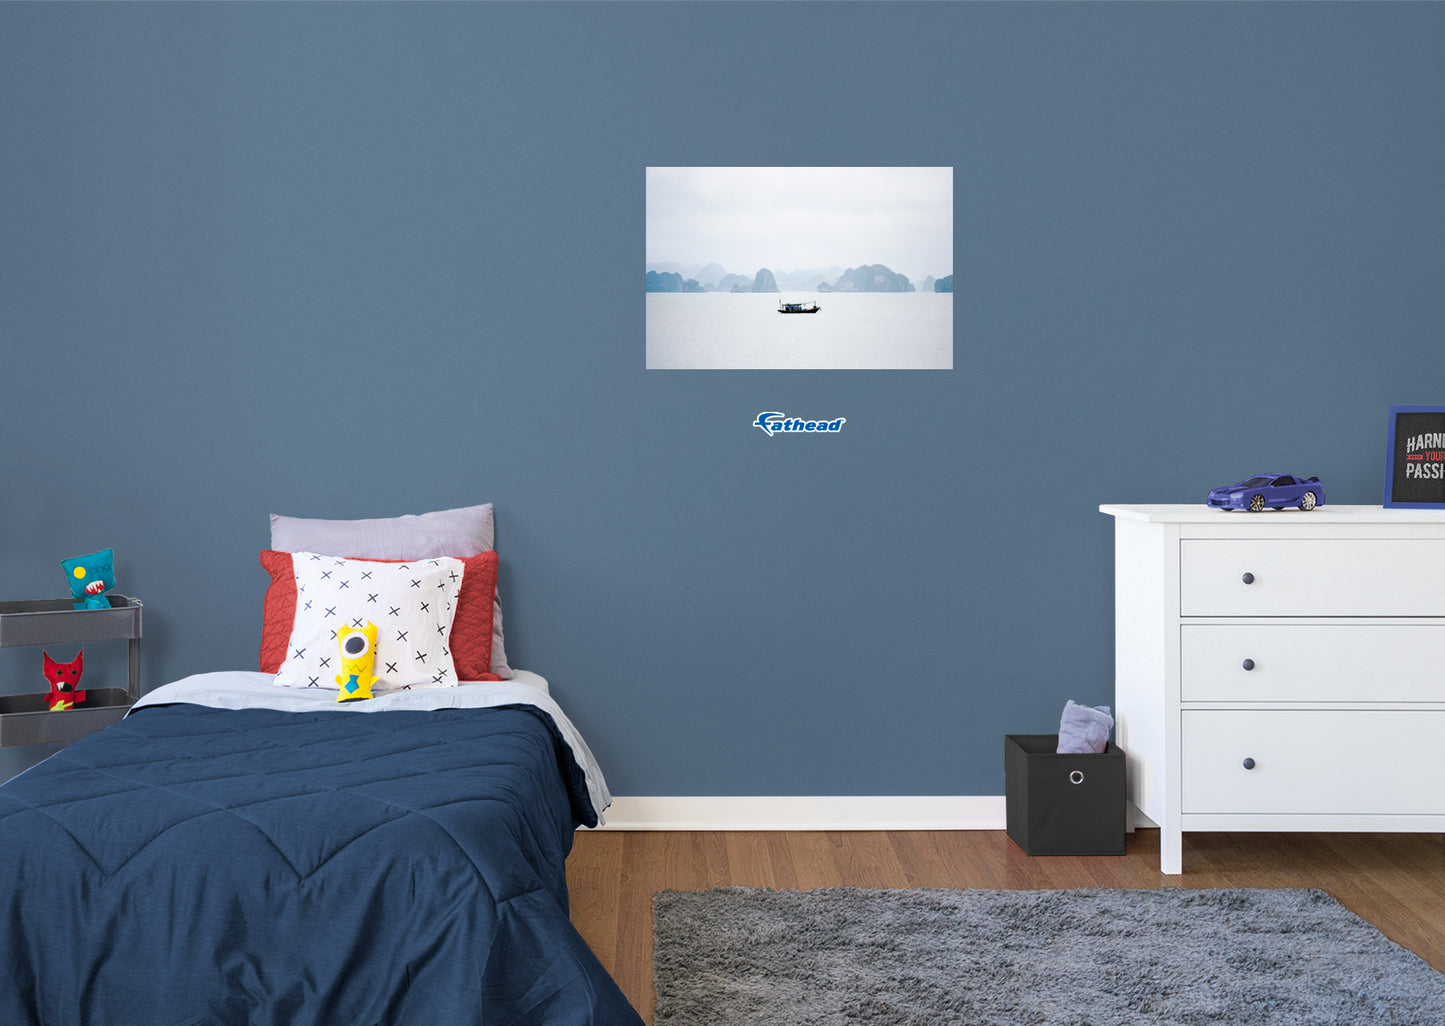 Generic Scenery:  Alone Poster        -   Removable     Adhesive Decal